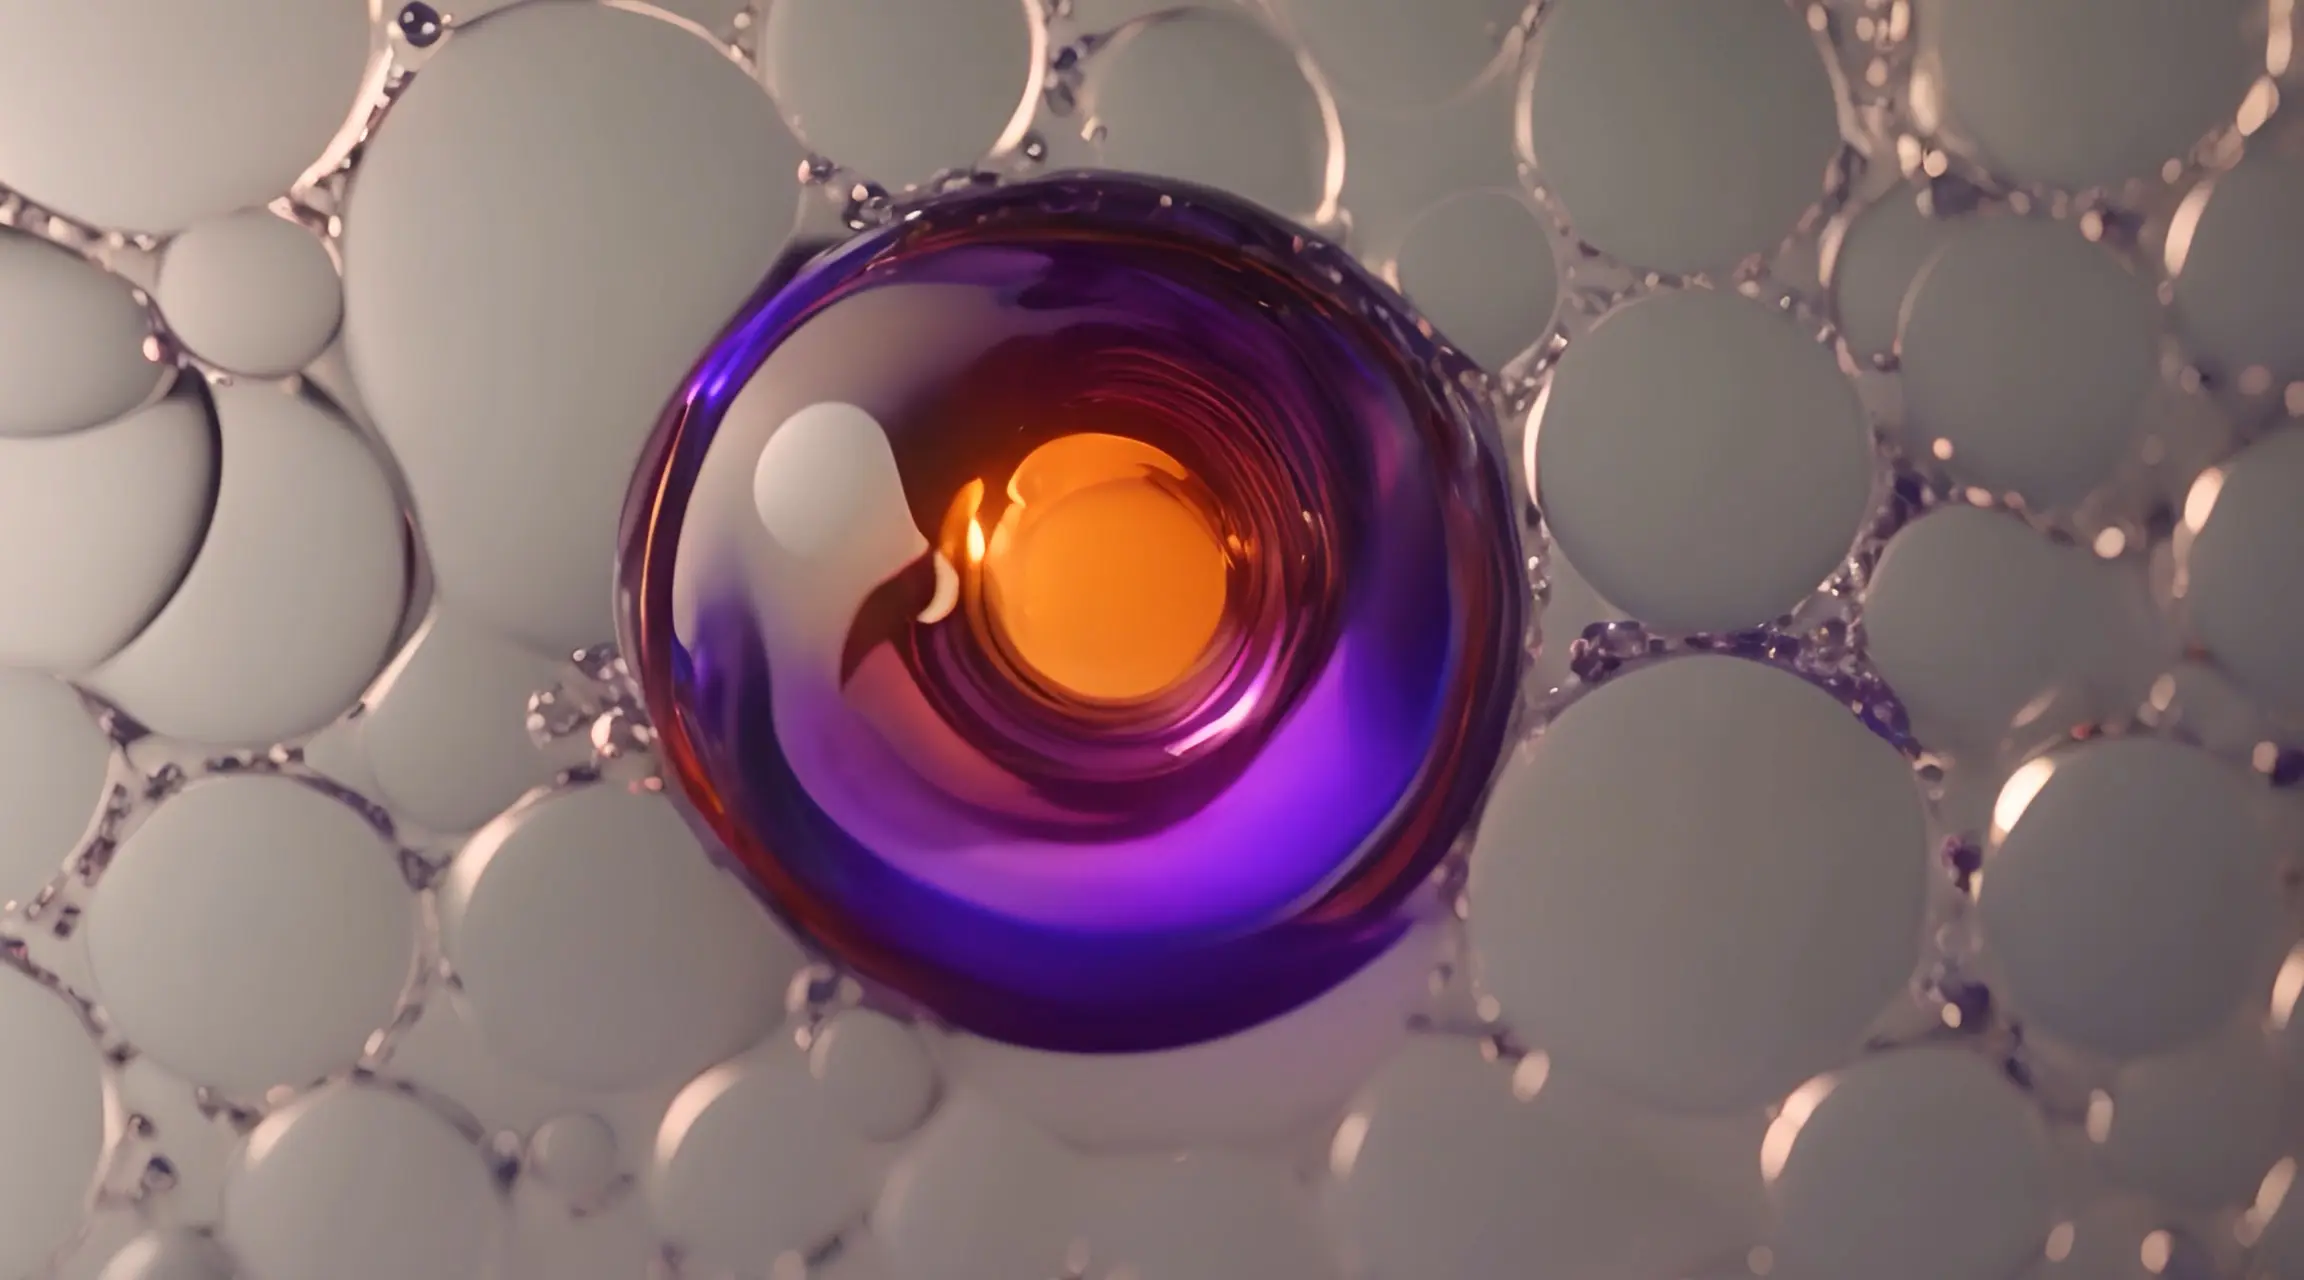 Abstract Bubbles and Swirls Loopable Video Backdrop